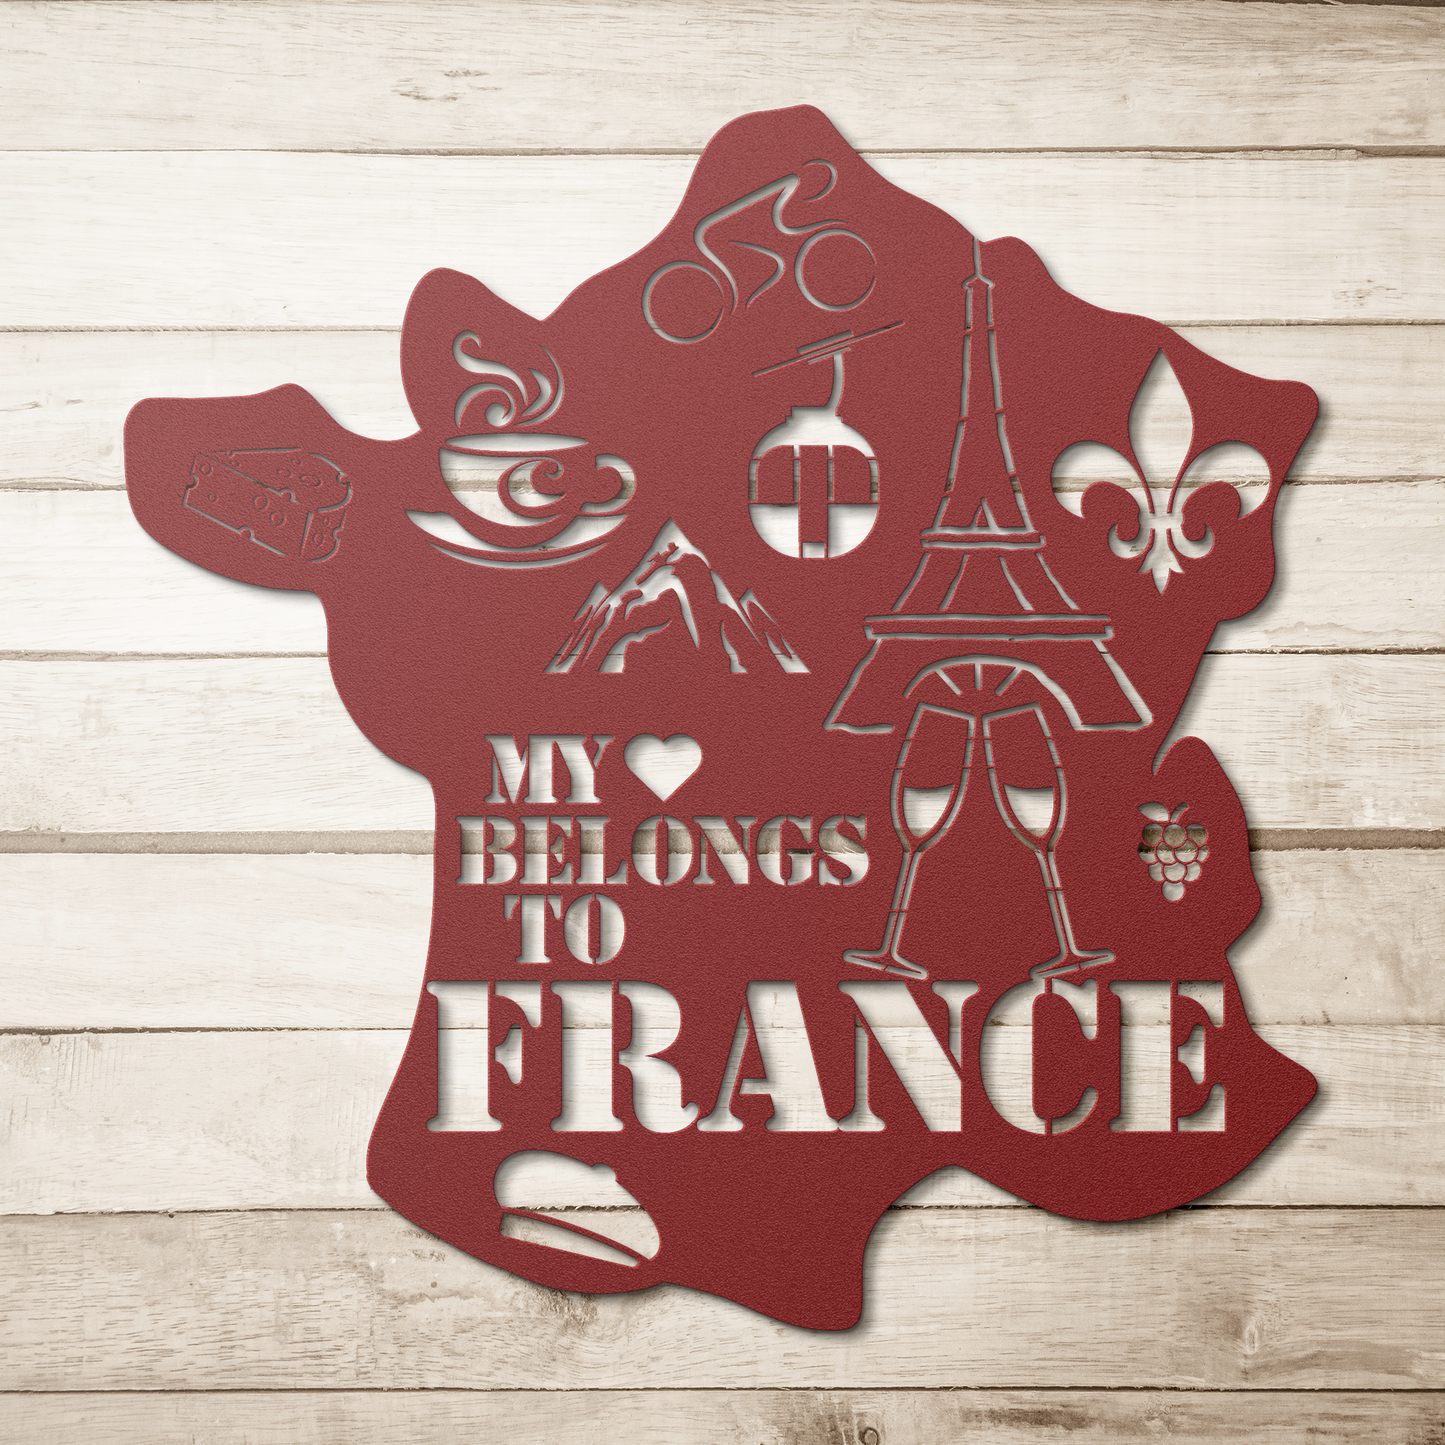 My Heart Belongs To France Metal Wall Art - Beautiful Metal Art Decor Piece To Remind You of Your Favorite Place to Travel and Visit